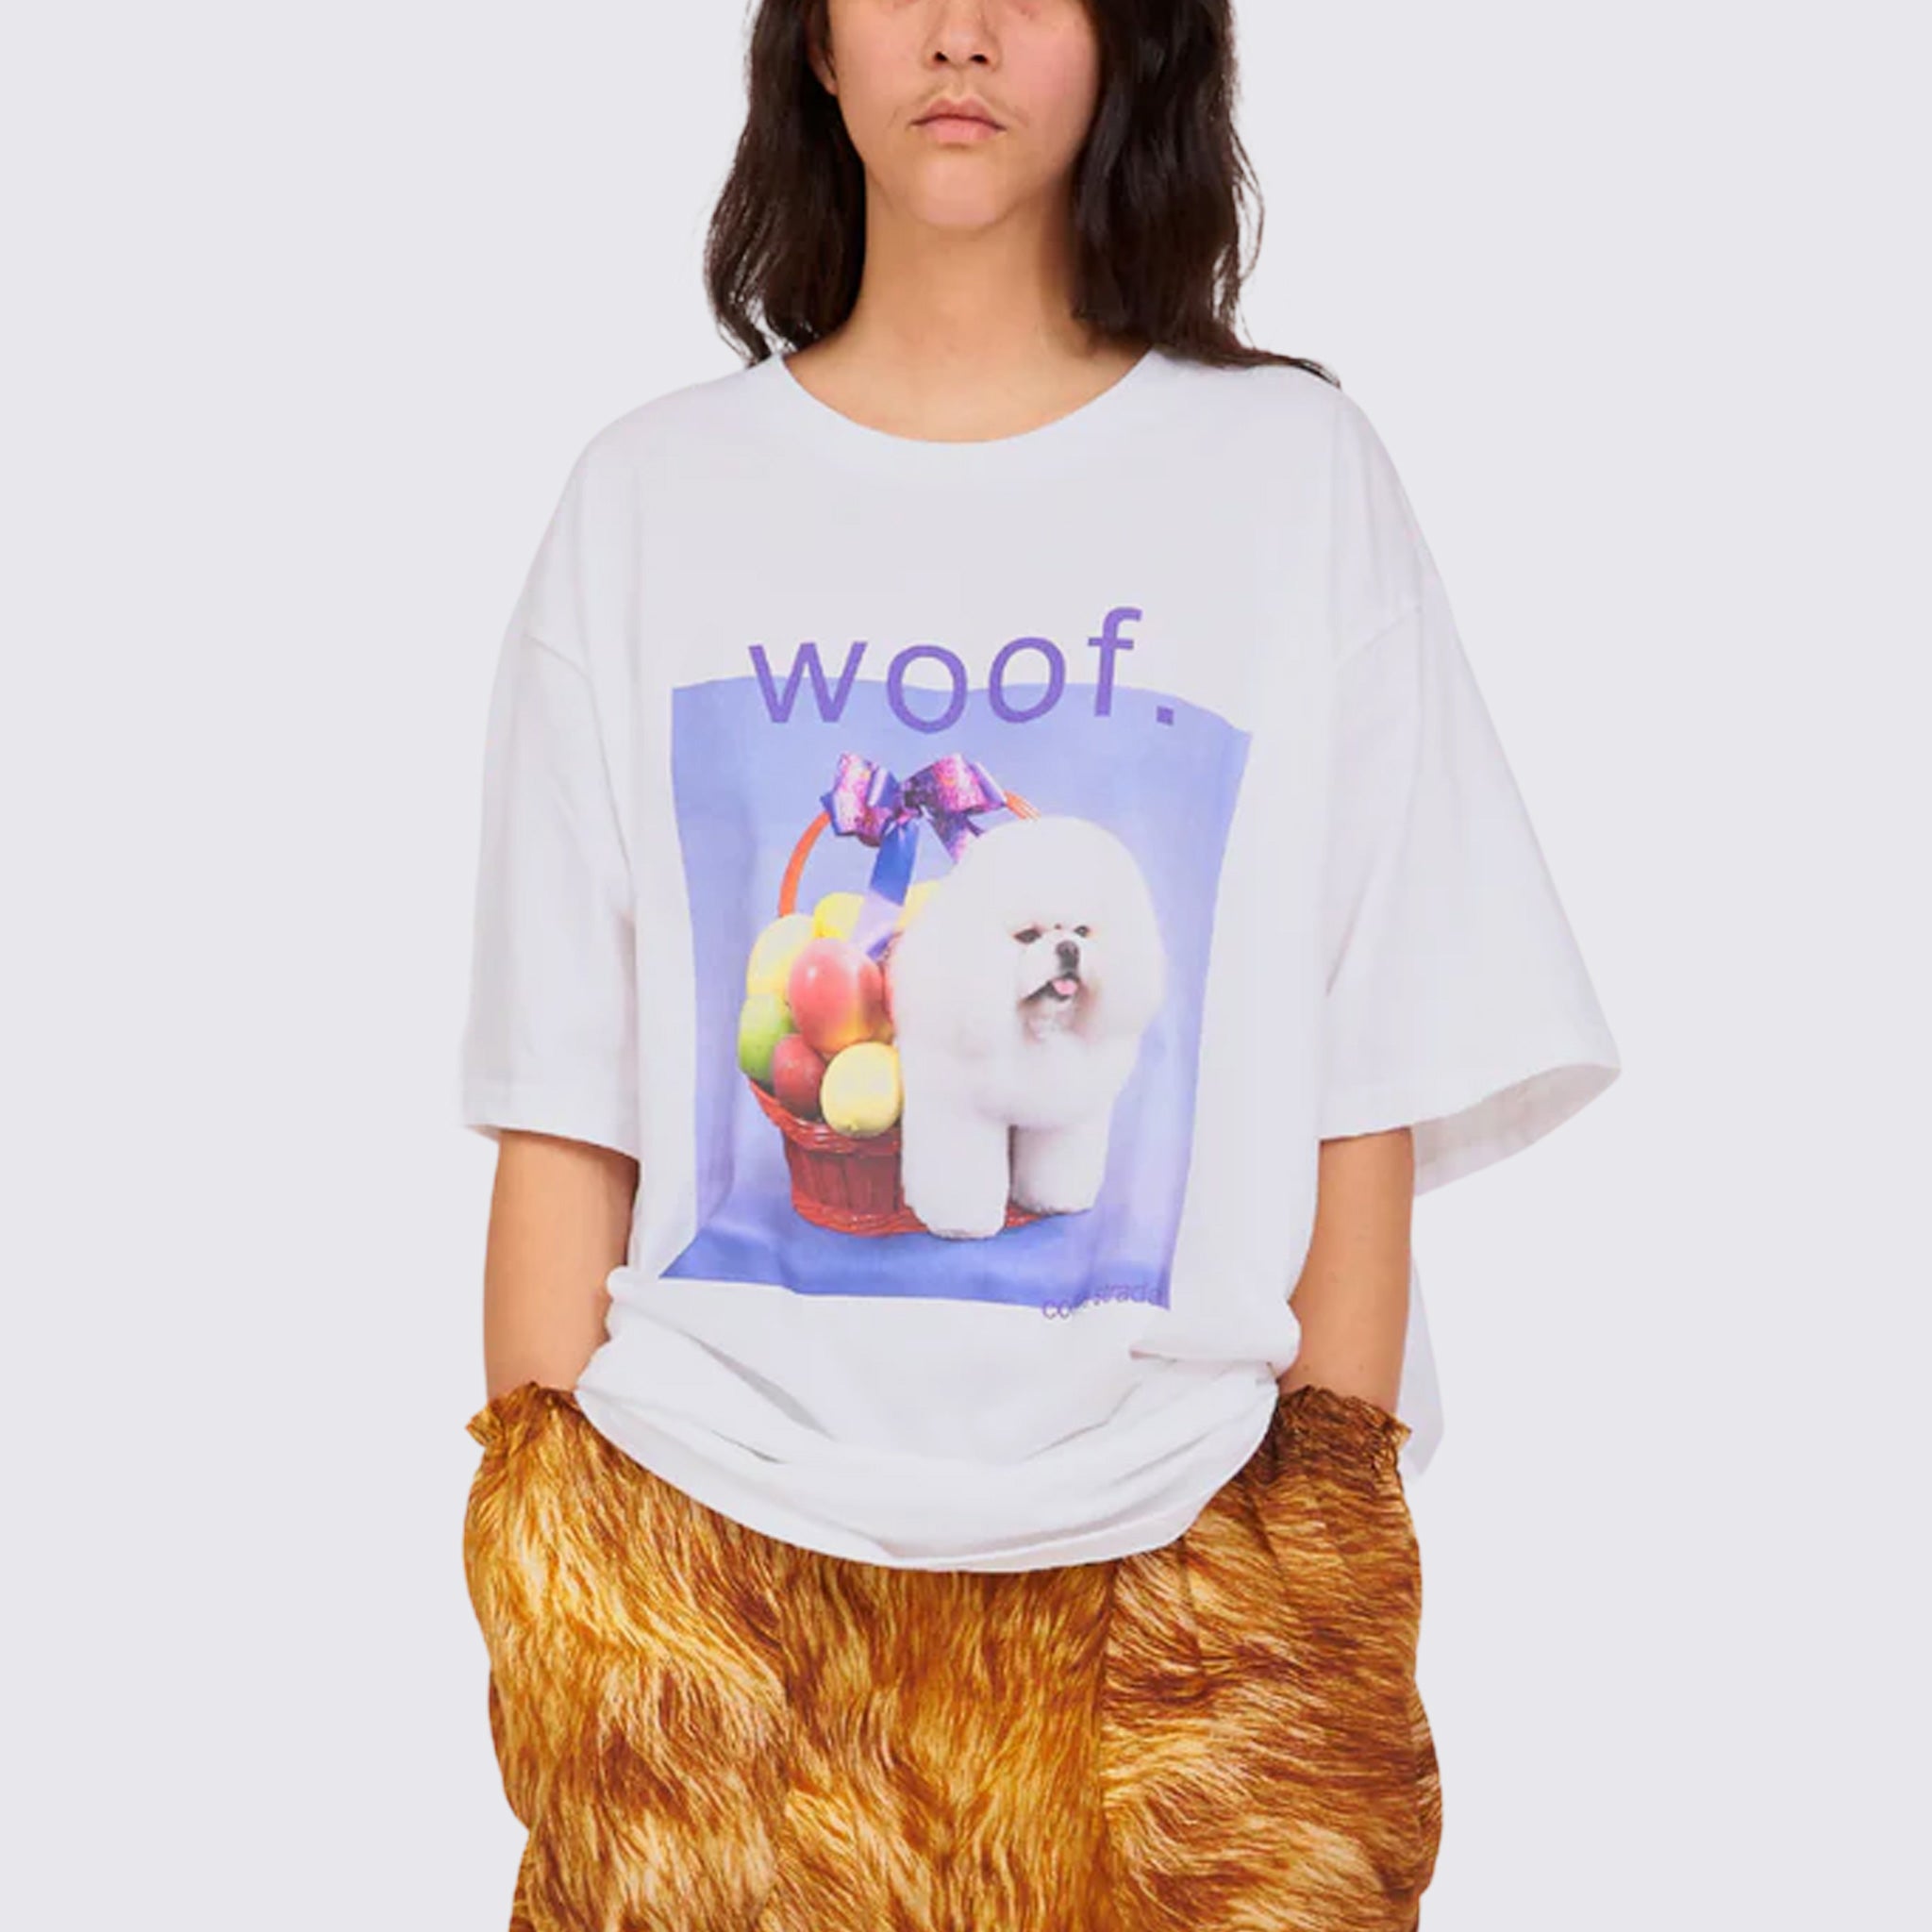 A model wears the XL size of the Graphic Tee in this season's WOOF print, featuring a small fluffy white dog sitting in a fruit basket.